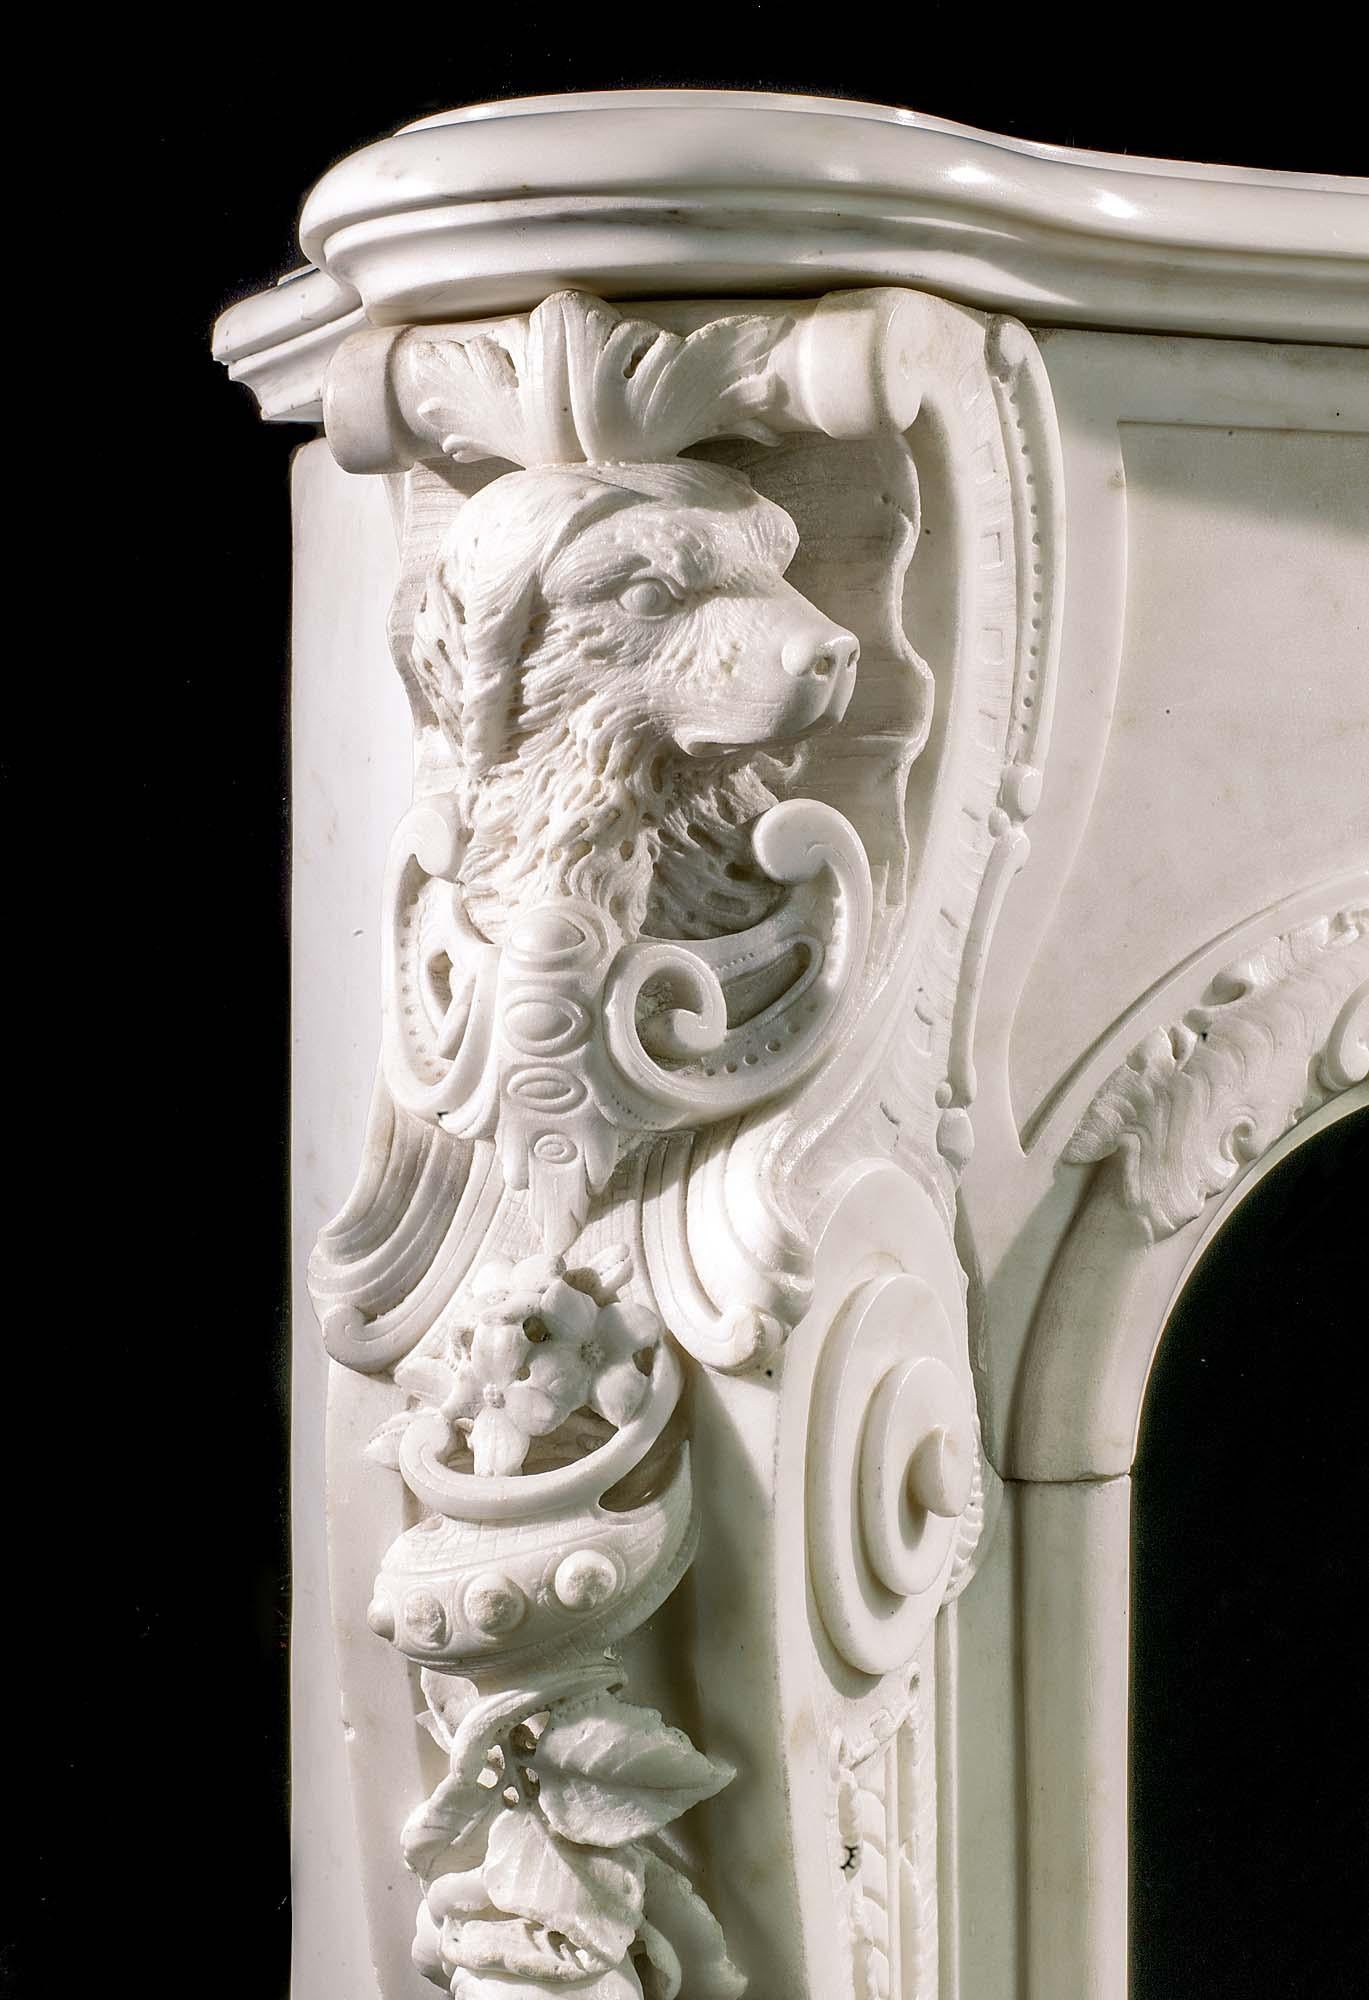 Carved Very Rare and Important Mid-18th Century English Rococo Marble Fireplace Mantel